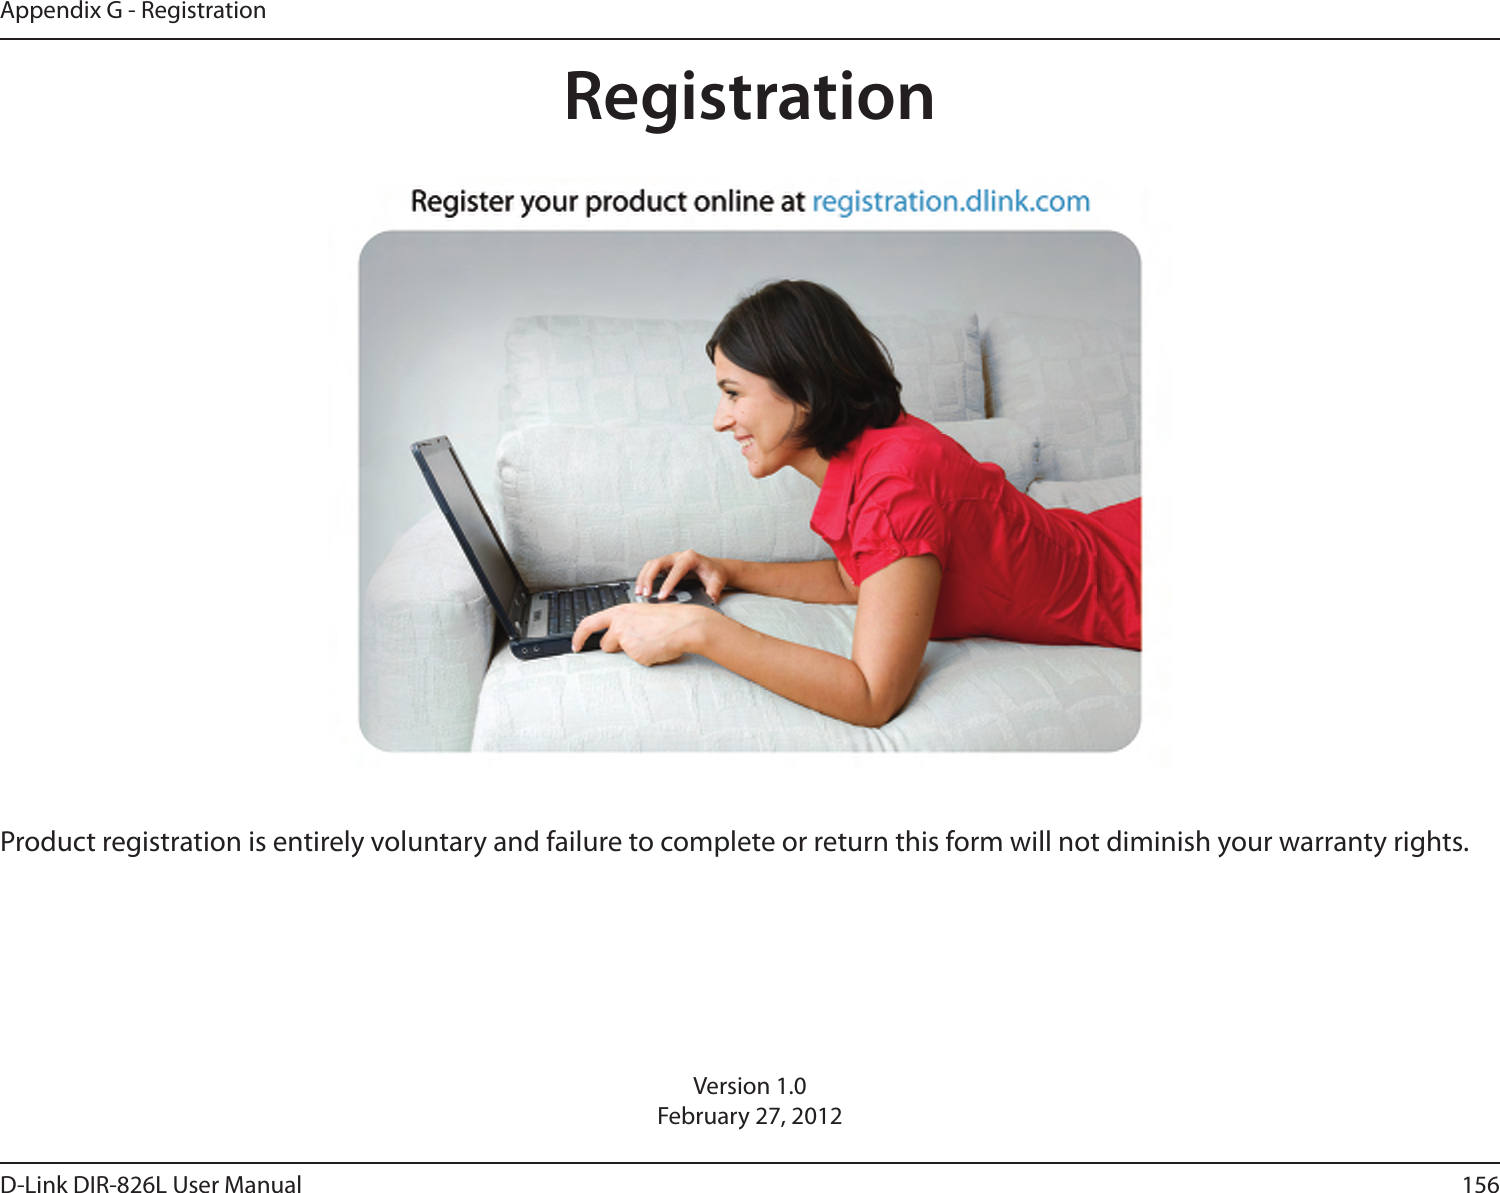 156D-Link DIR-826L User ManualAppendix G - RegistrationVersion 1.0February 27, 2012Product registration is entirely voluntary and failure to complete or return this form will not diminish your warranty rights.Registration